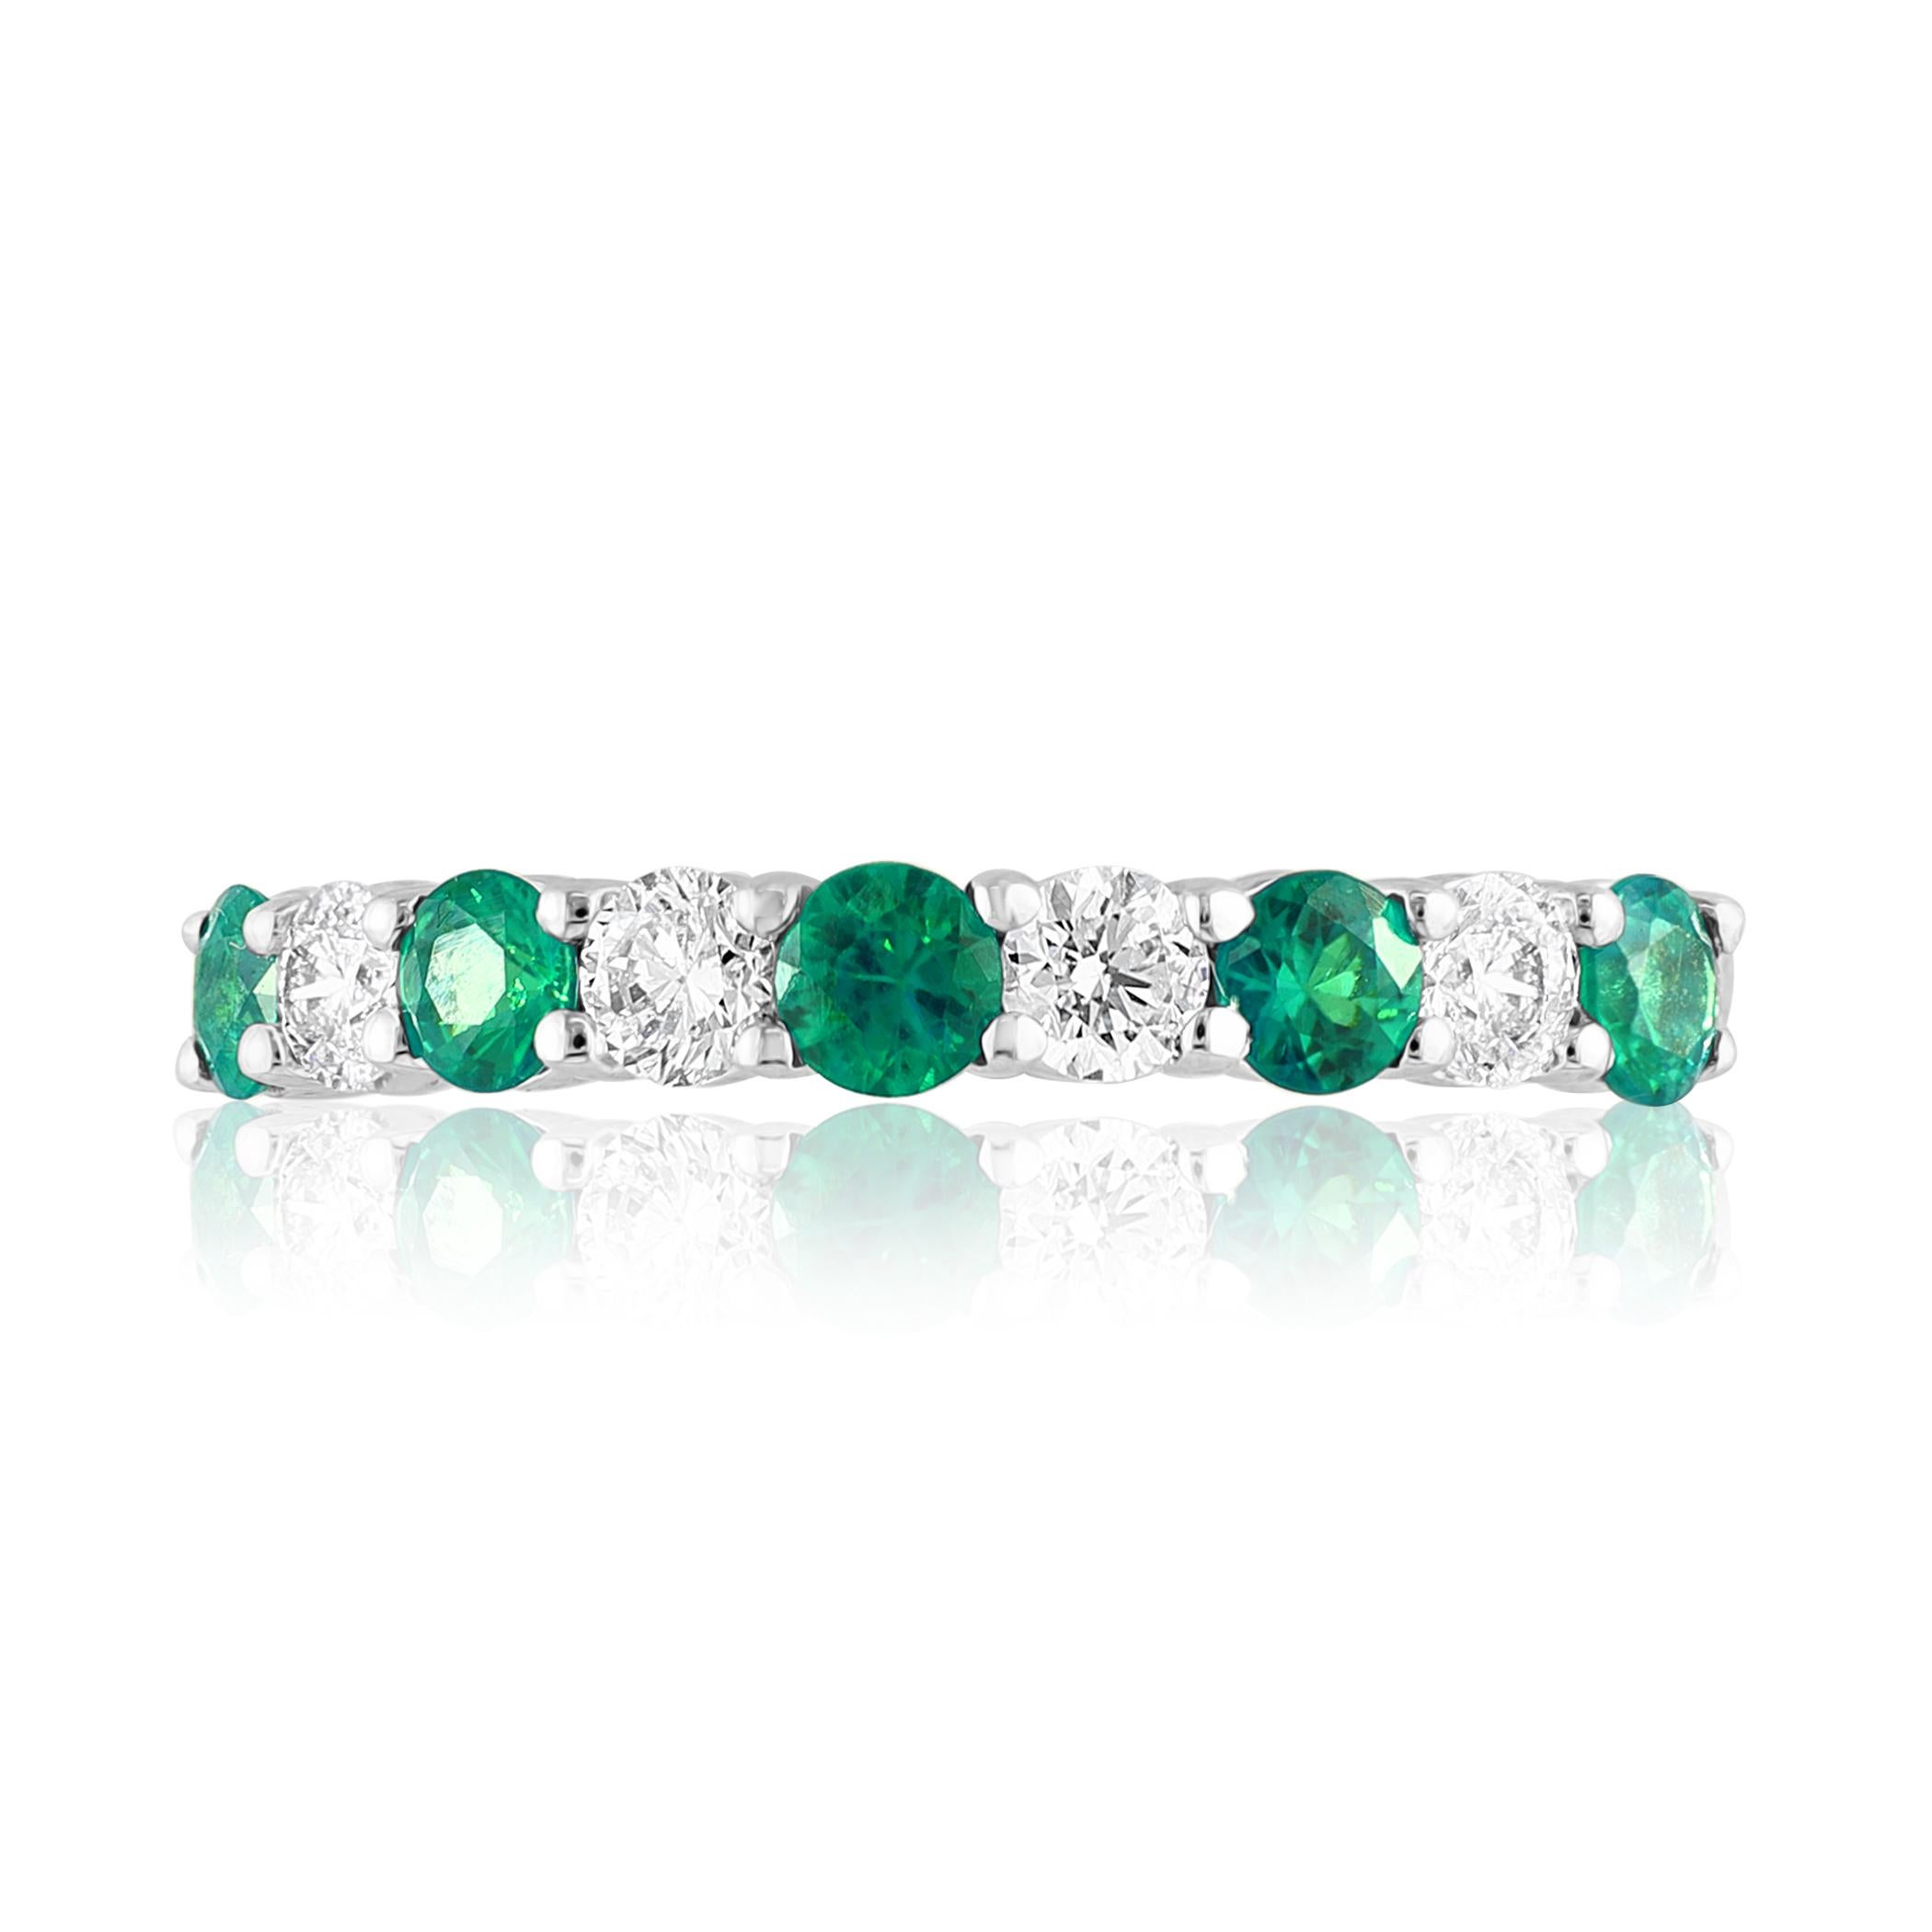 A fashionable and classic wedding band showcasing 4 brilliant cut diamonds weighing 0.37 carats total alternating with 5 round emeralds weighing 0.33 carats. Stones secured with a shared 4 prong setting made with 14K white gold. A versatile piece